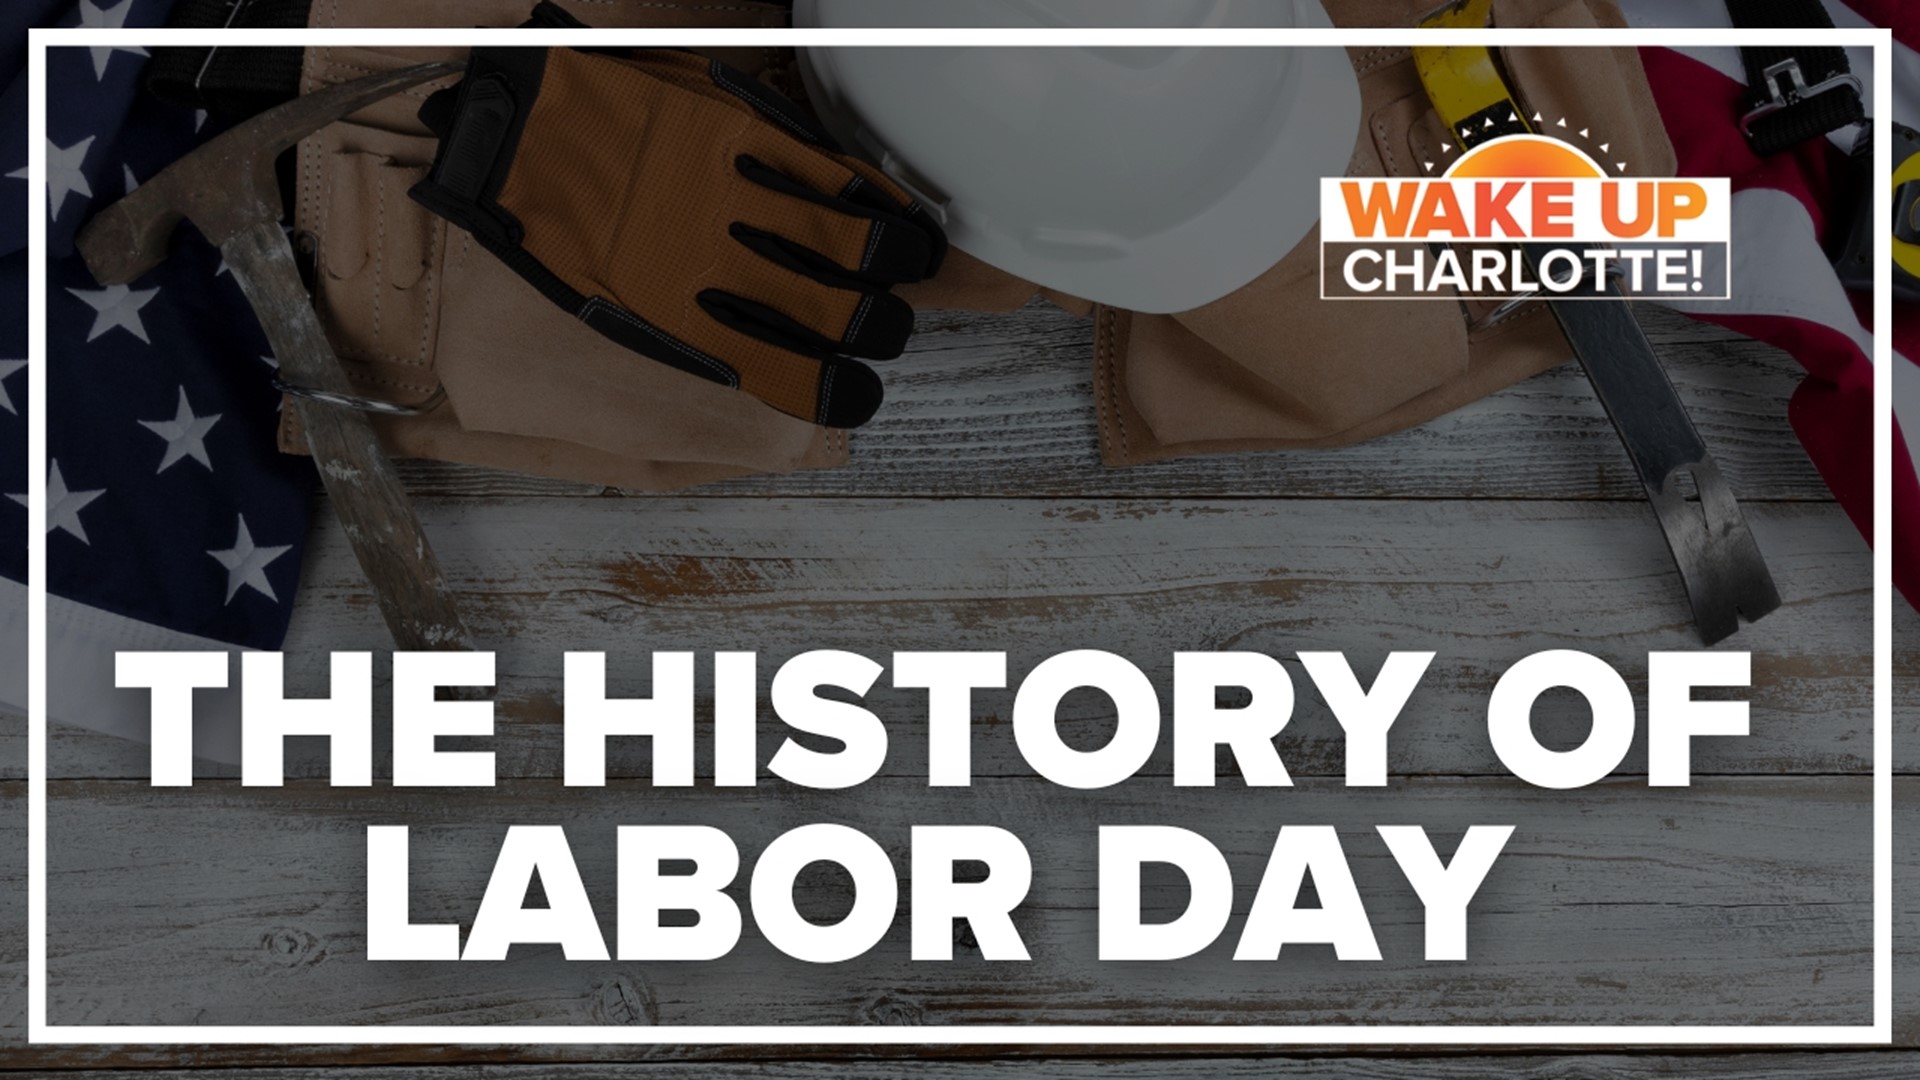 Why do we celebrate Labor Day?